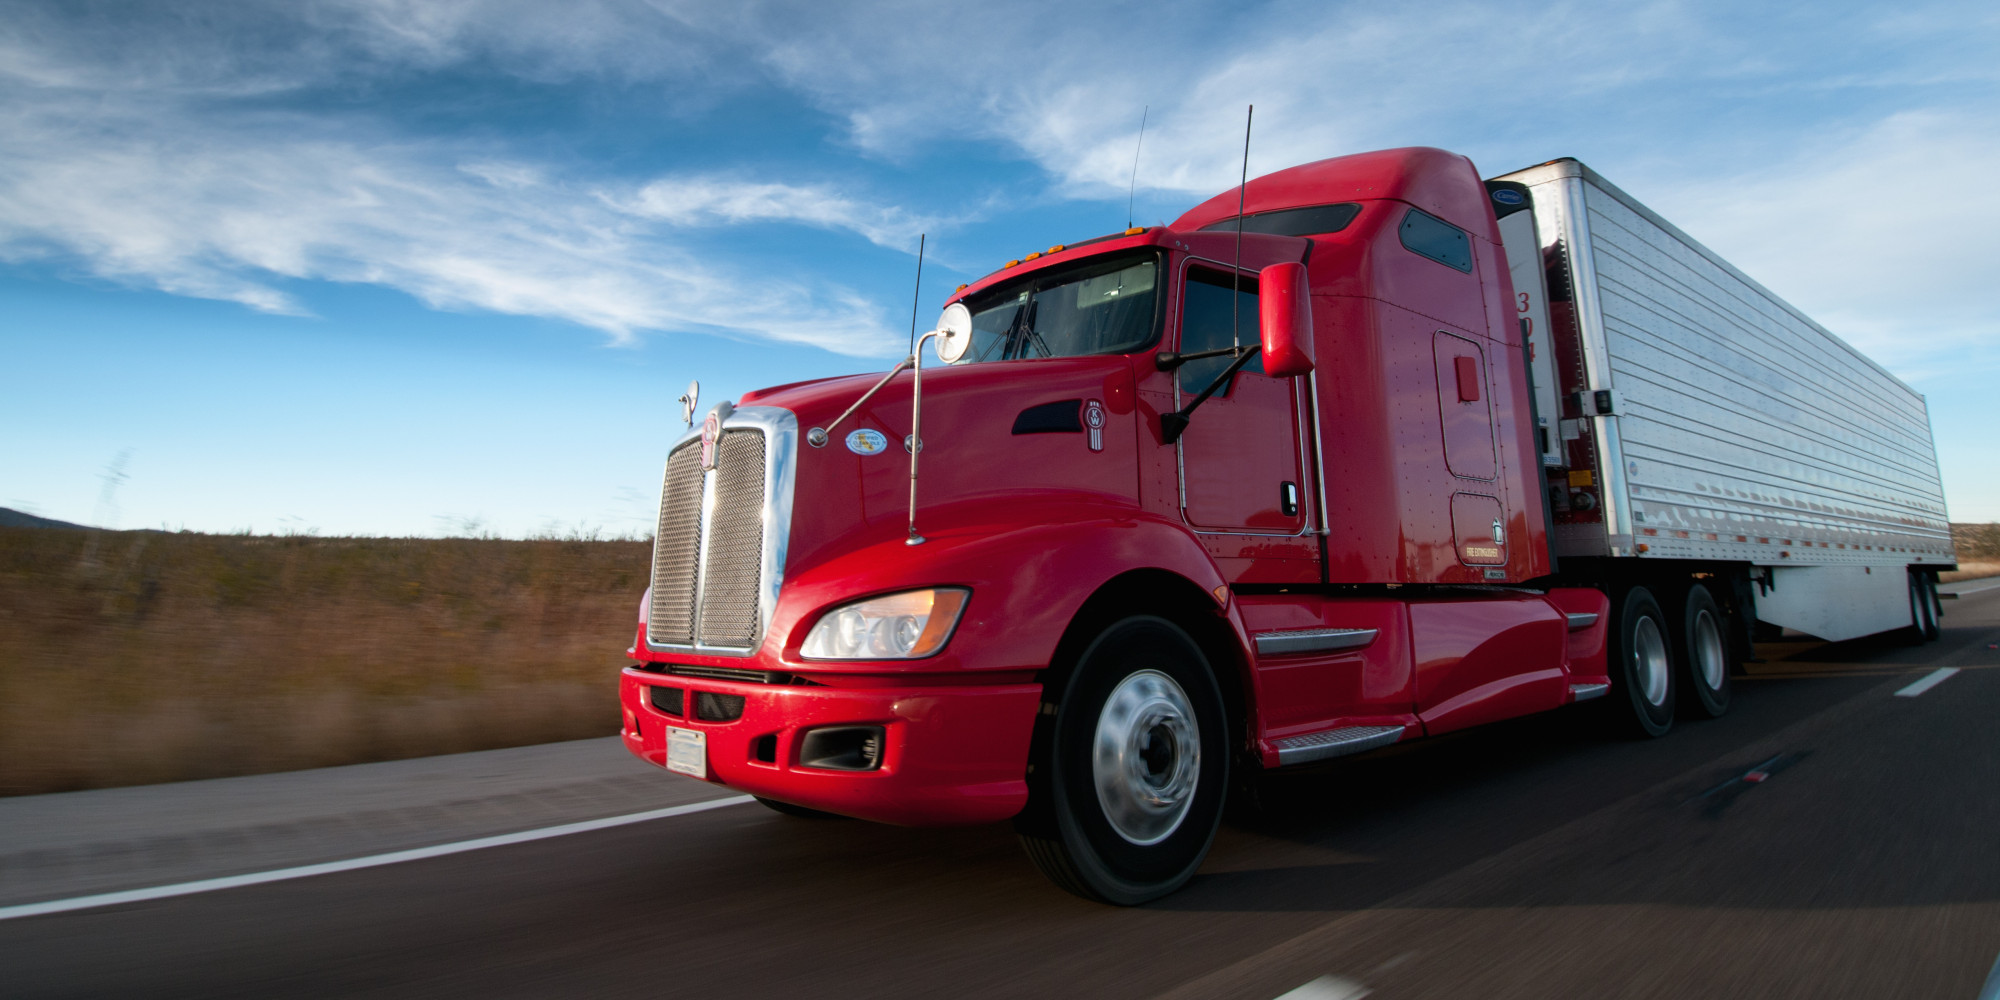 6 Essential Truck Driver Safety Tips to Minimize Risk